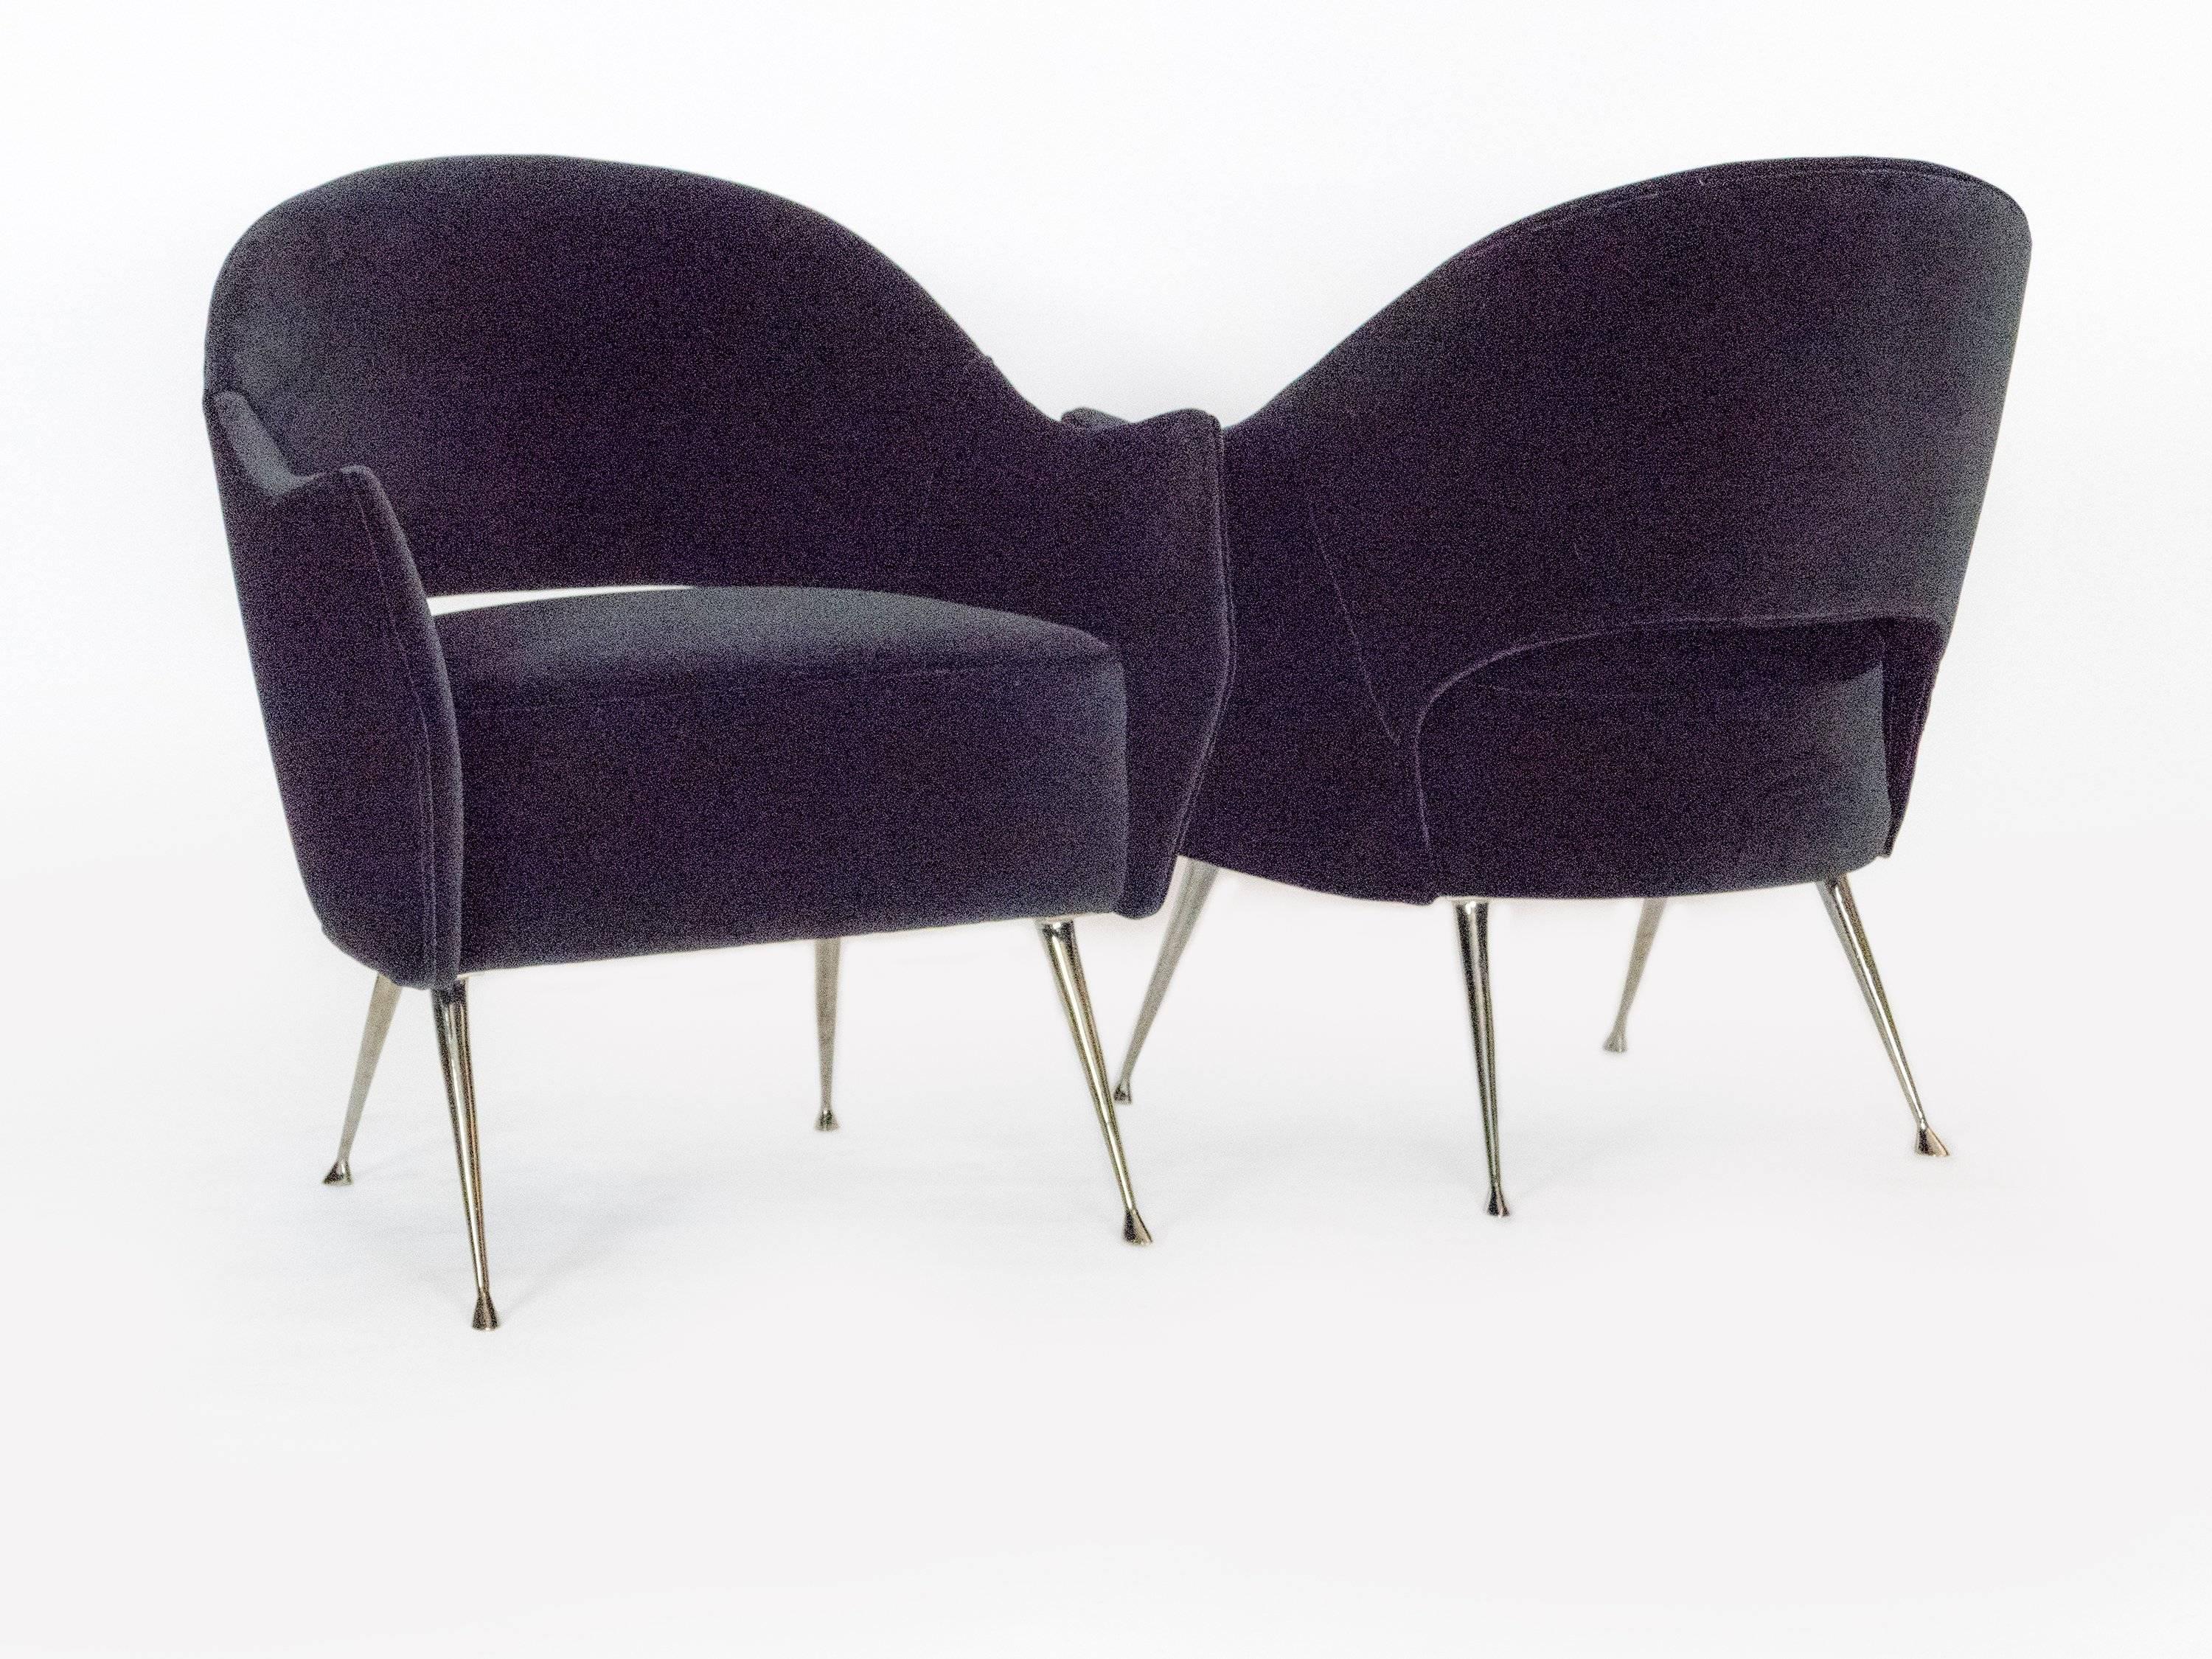 These elegant chairs have black nickel-plated legs and a distinctive curved back. The chair is very comfortable, perfect in size and are ideal as small scale side chairs. The beauty of the tapered legs with their graceful feet are sure to add that